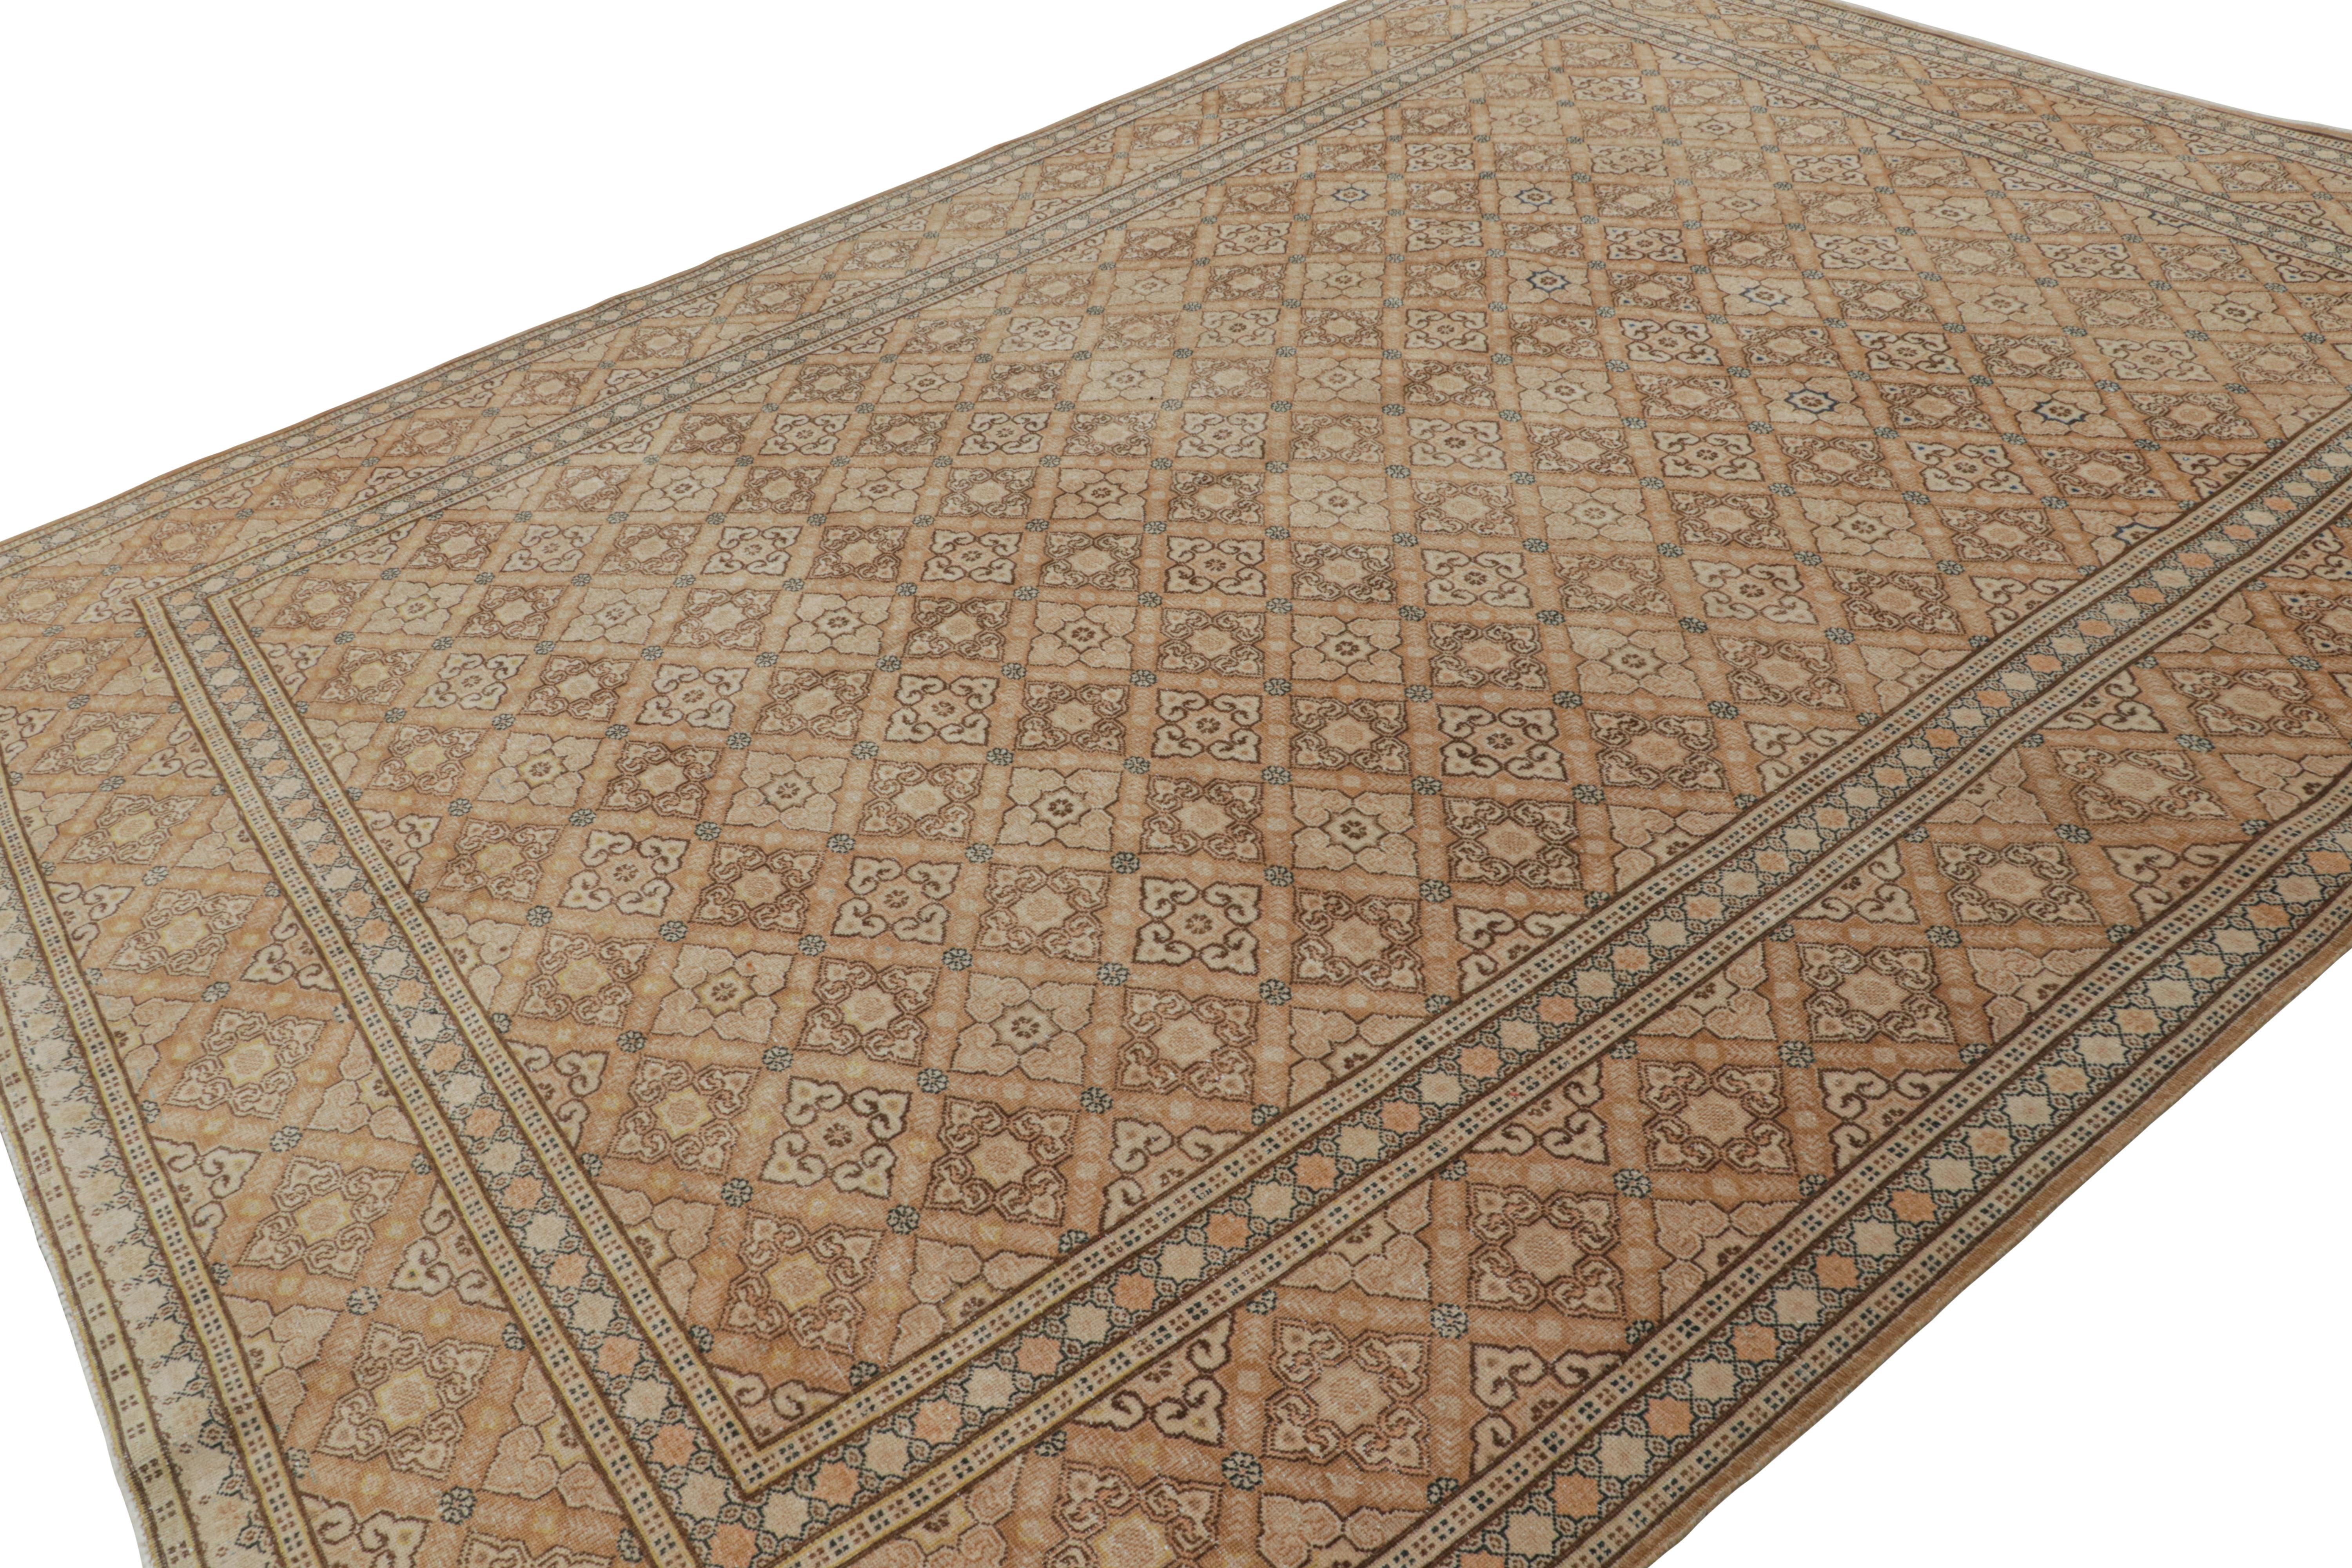 Hand-knotted in luxurious wool, this 9x13 vintage Persian Tabriz rug features a rich design of repetitive floral patterns in hues of terracotta, beige/brown and blue. 

On the design:

Connoisseurs will admire the sense of dimension in the subtle